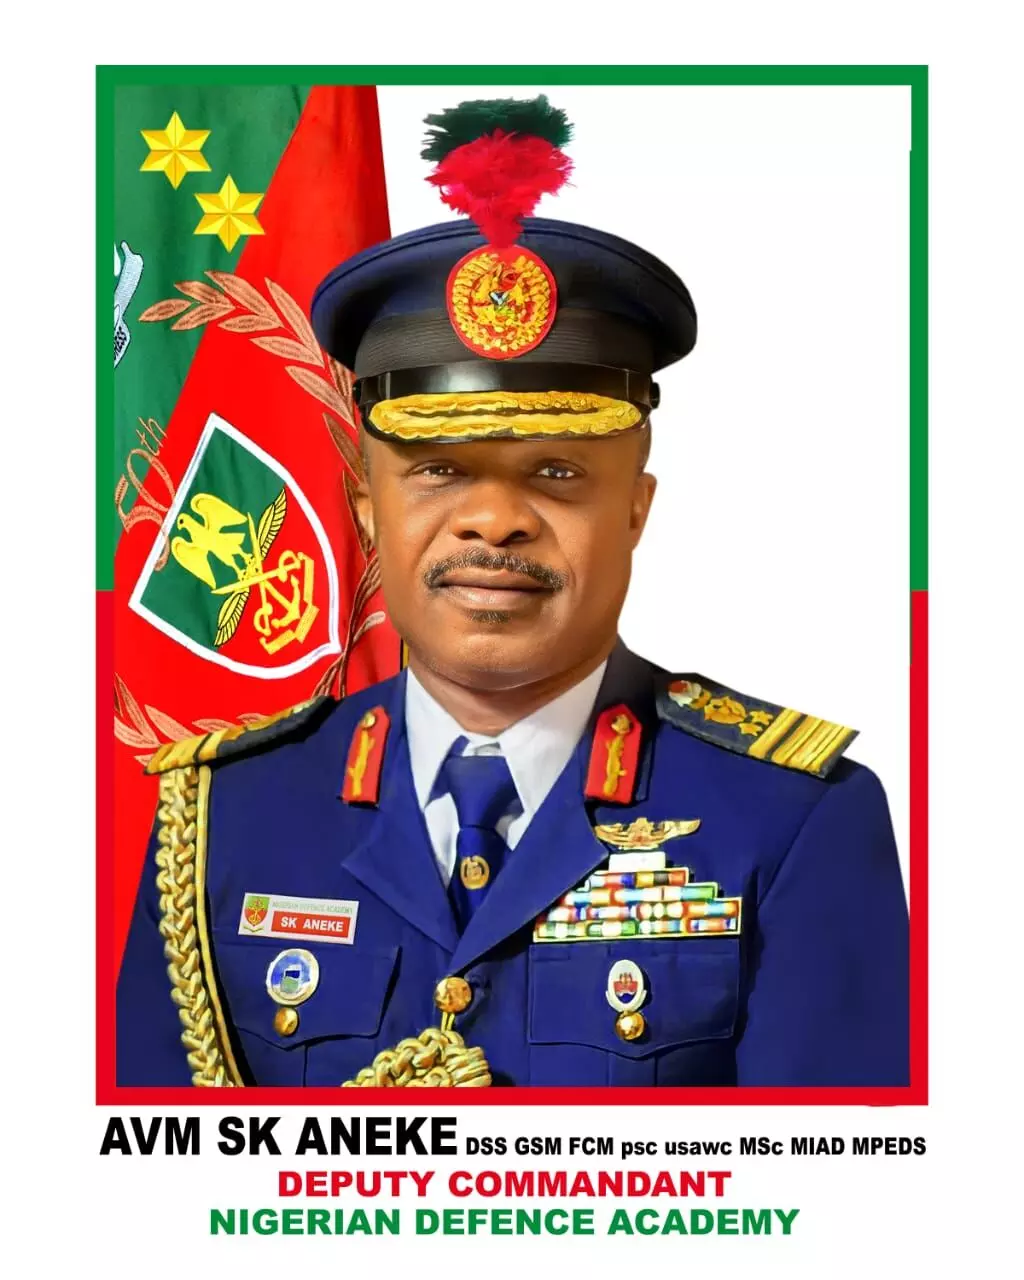 Be more resolute in defeating, destroying adversaries, Aneke urges military